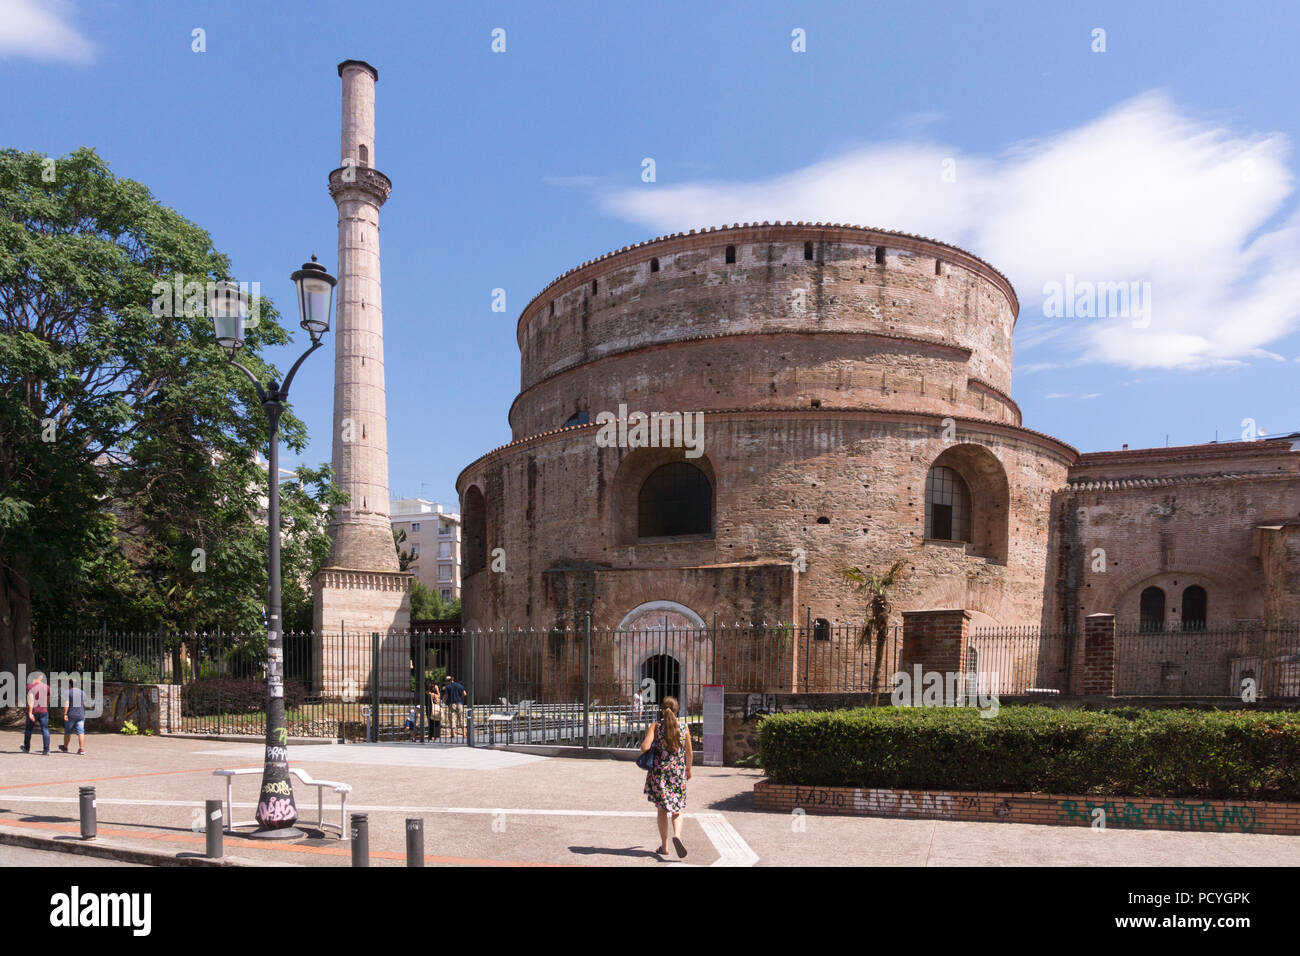 Built in 306 A.D. by the romans, the Rotunda of Galerius is one of the oldest religious sites of the city of Thessaloniki and a popular tourist site Stock Photo